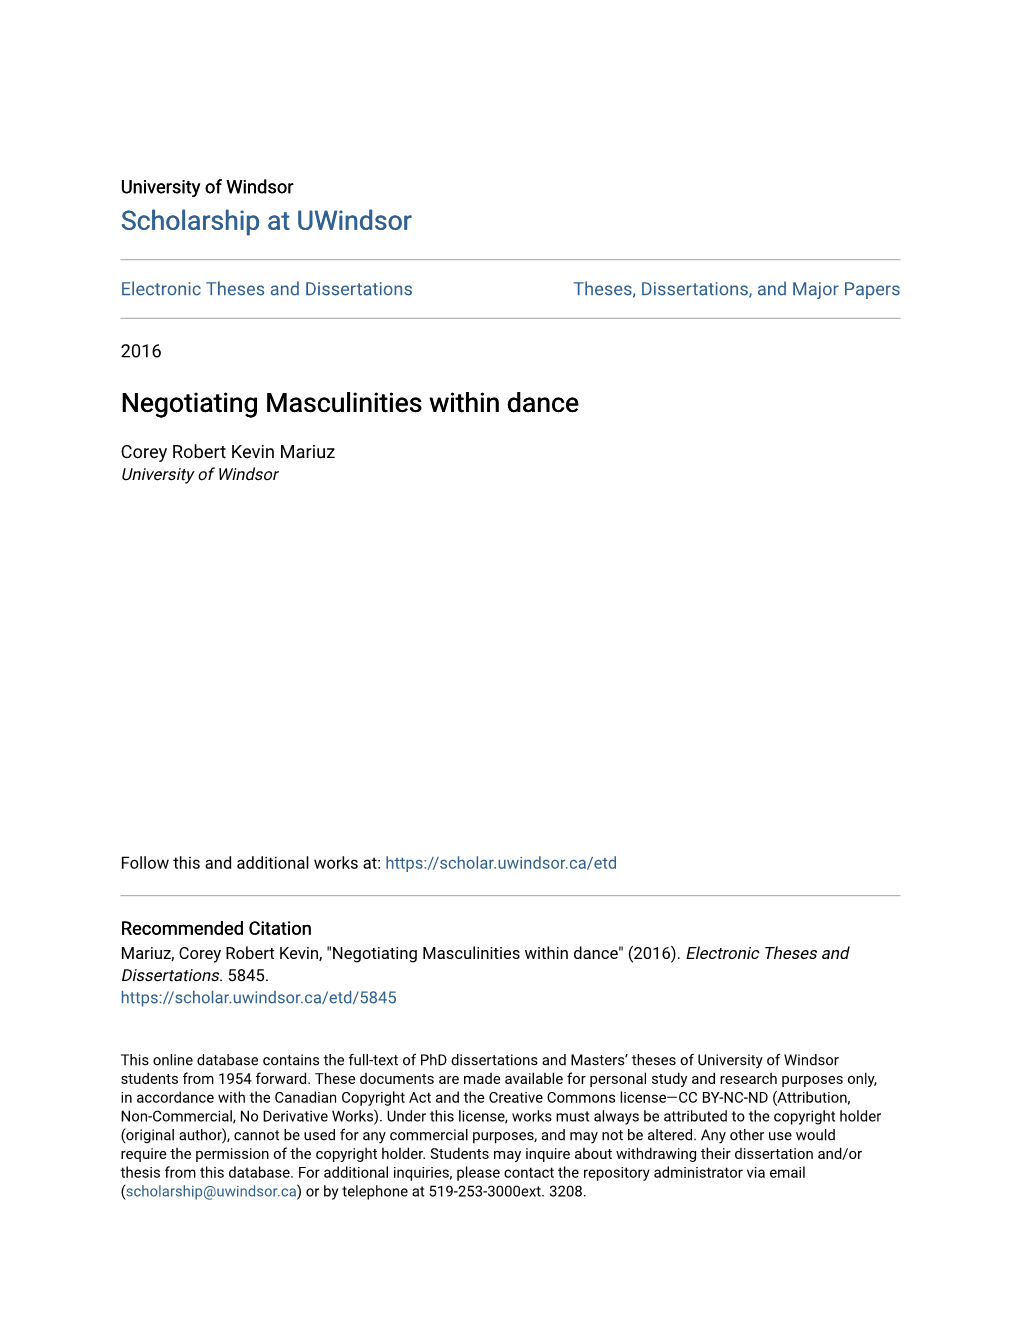 Negotiating Masculinities Within Dance